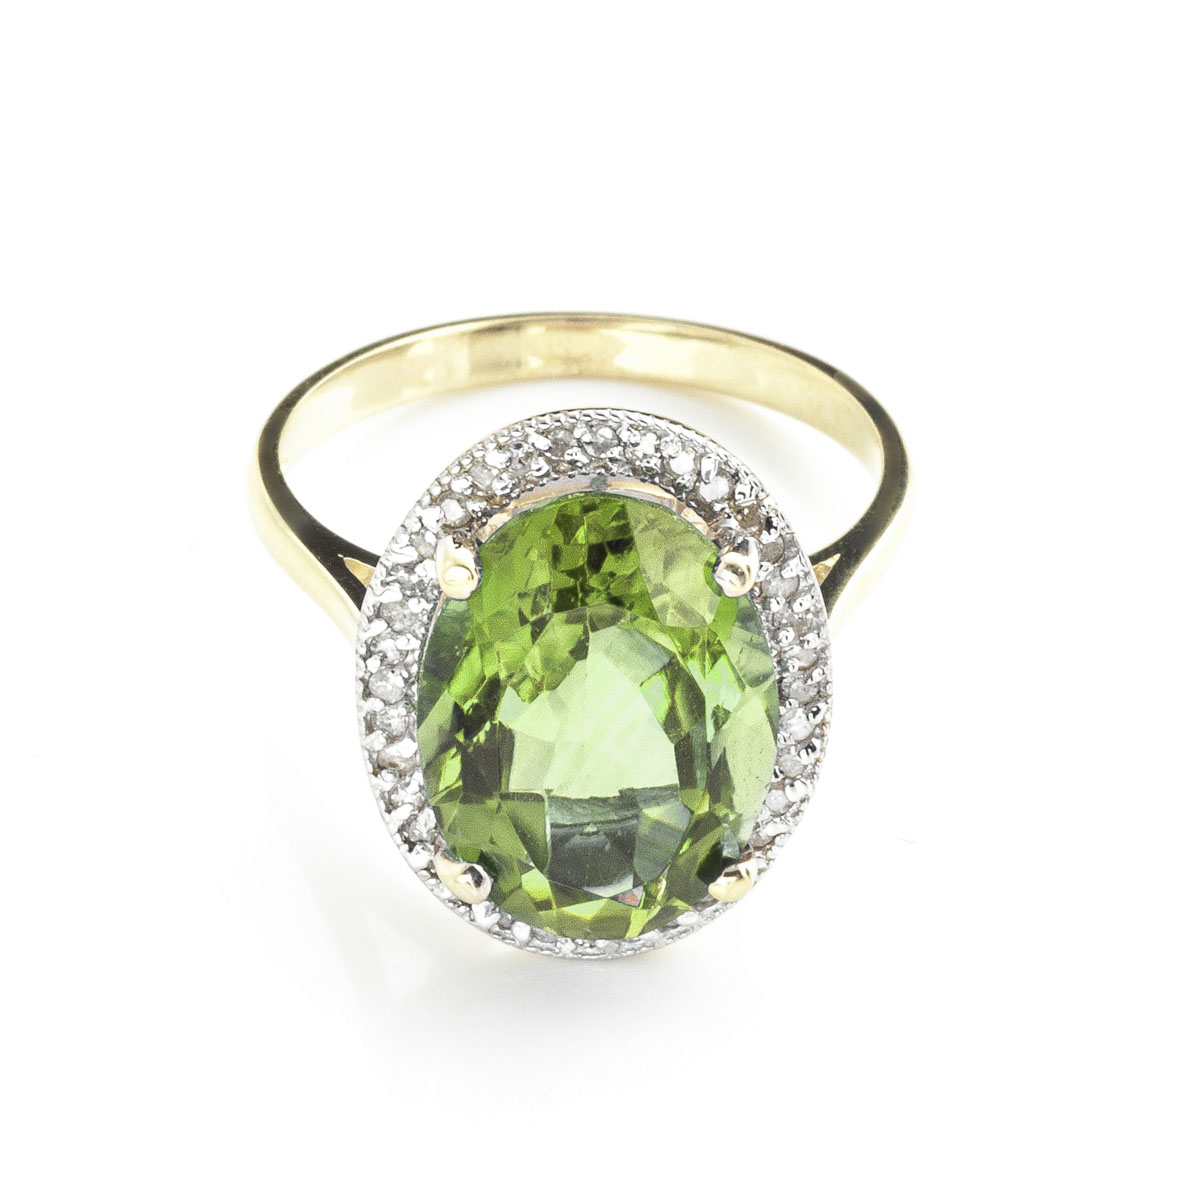 Green Amethyst Halo Ring 5.28 ctw in 9ct Gold